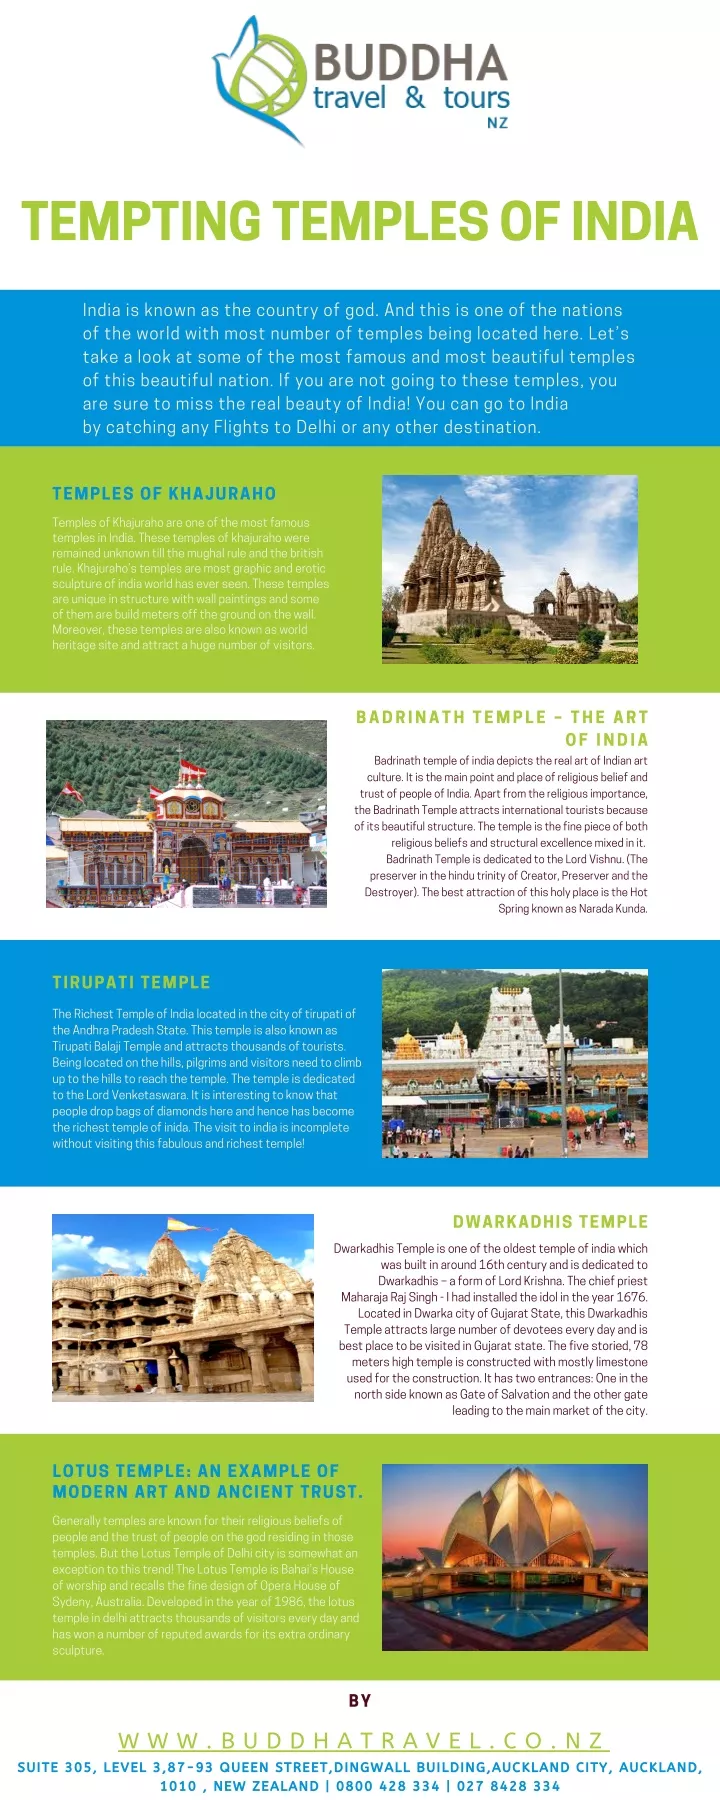 tempting temples of india